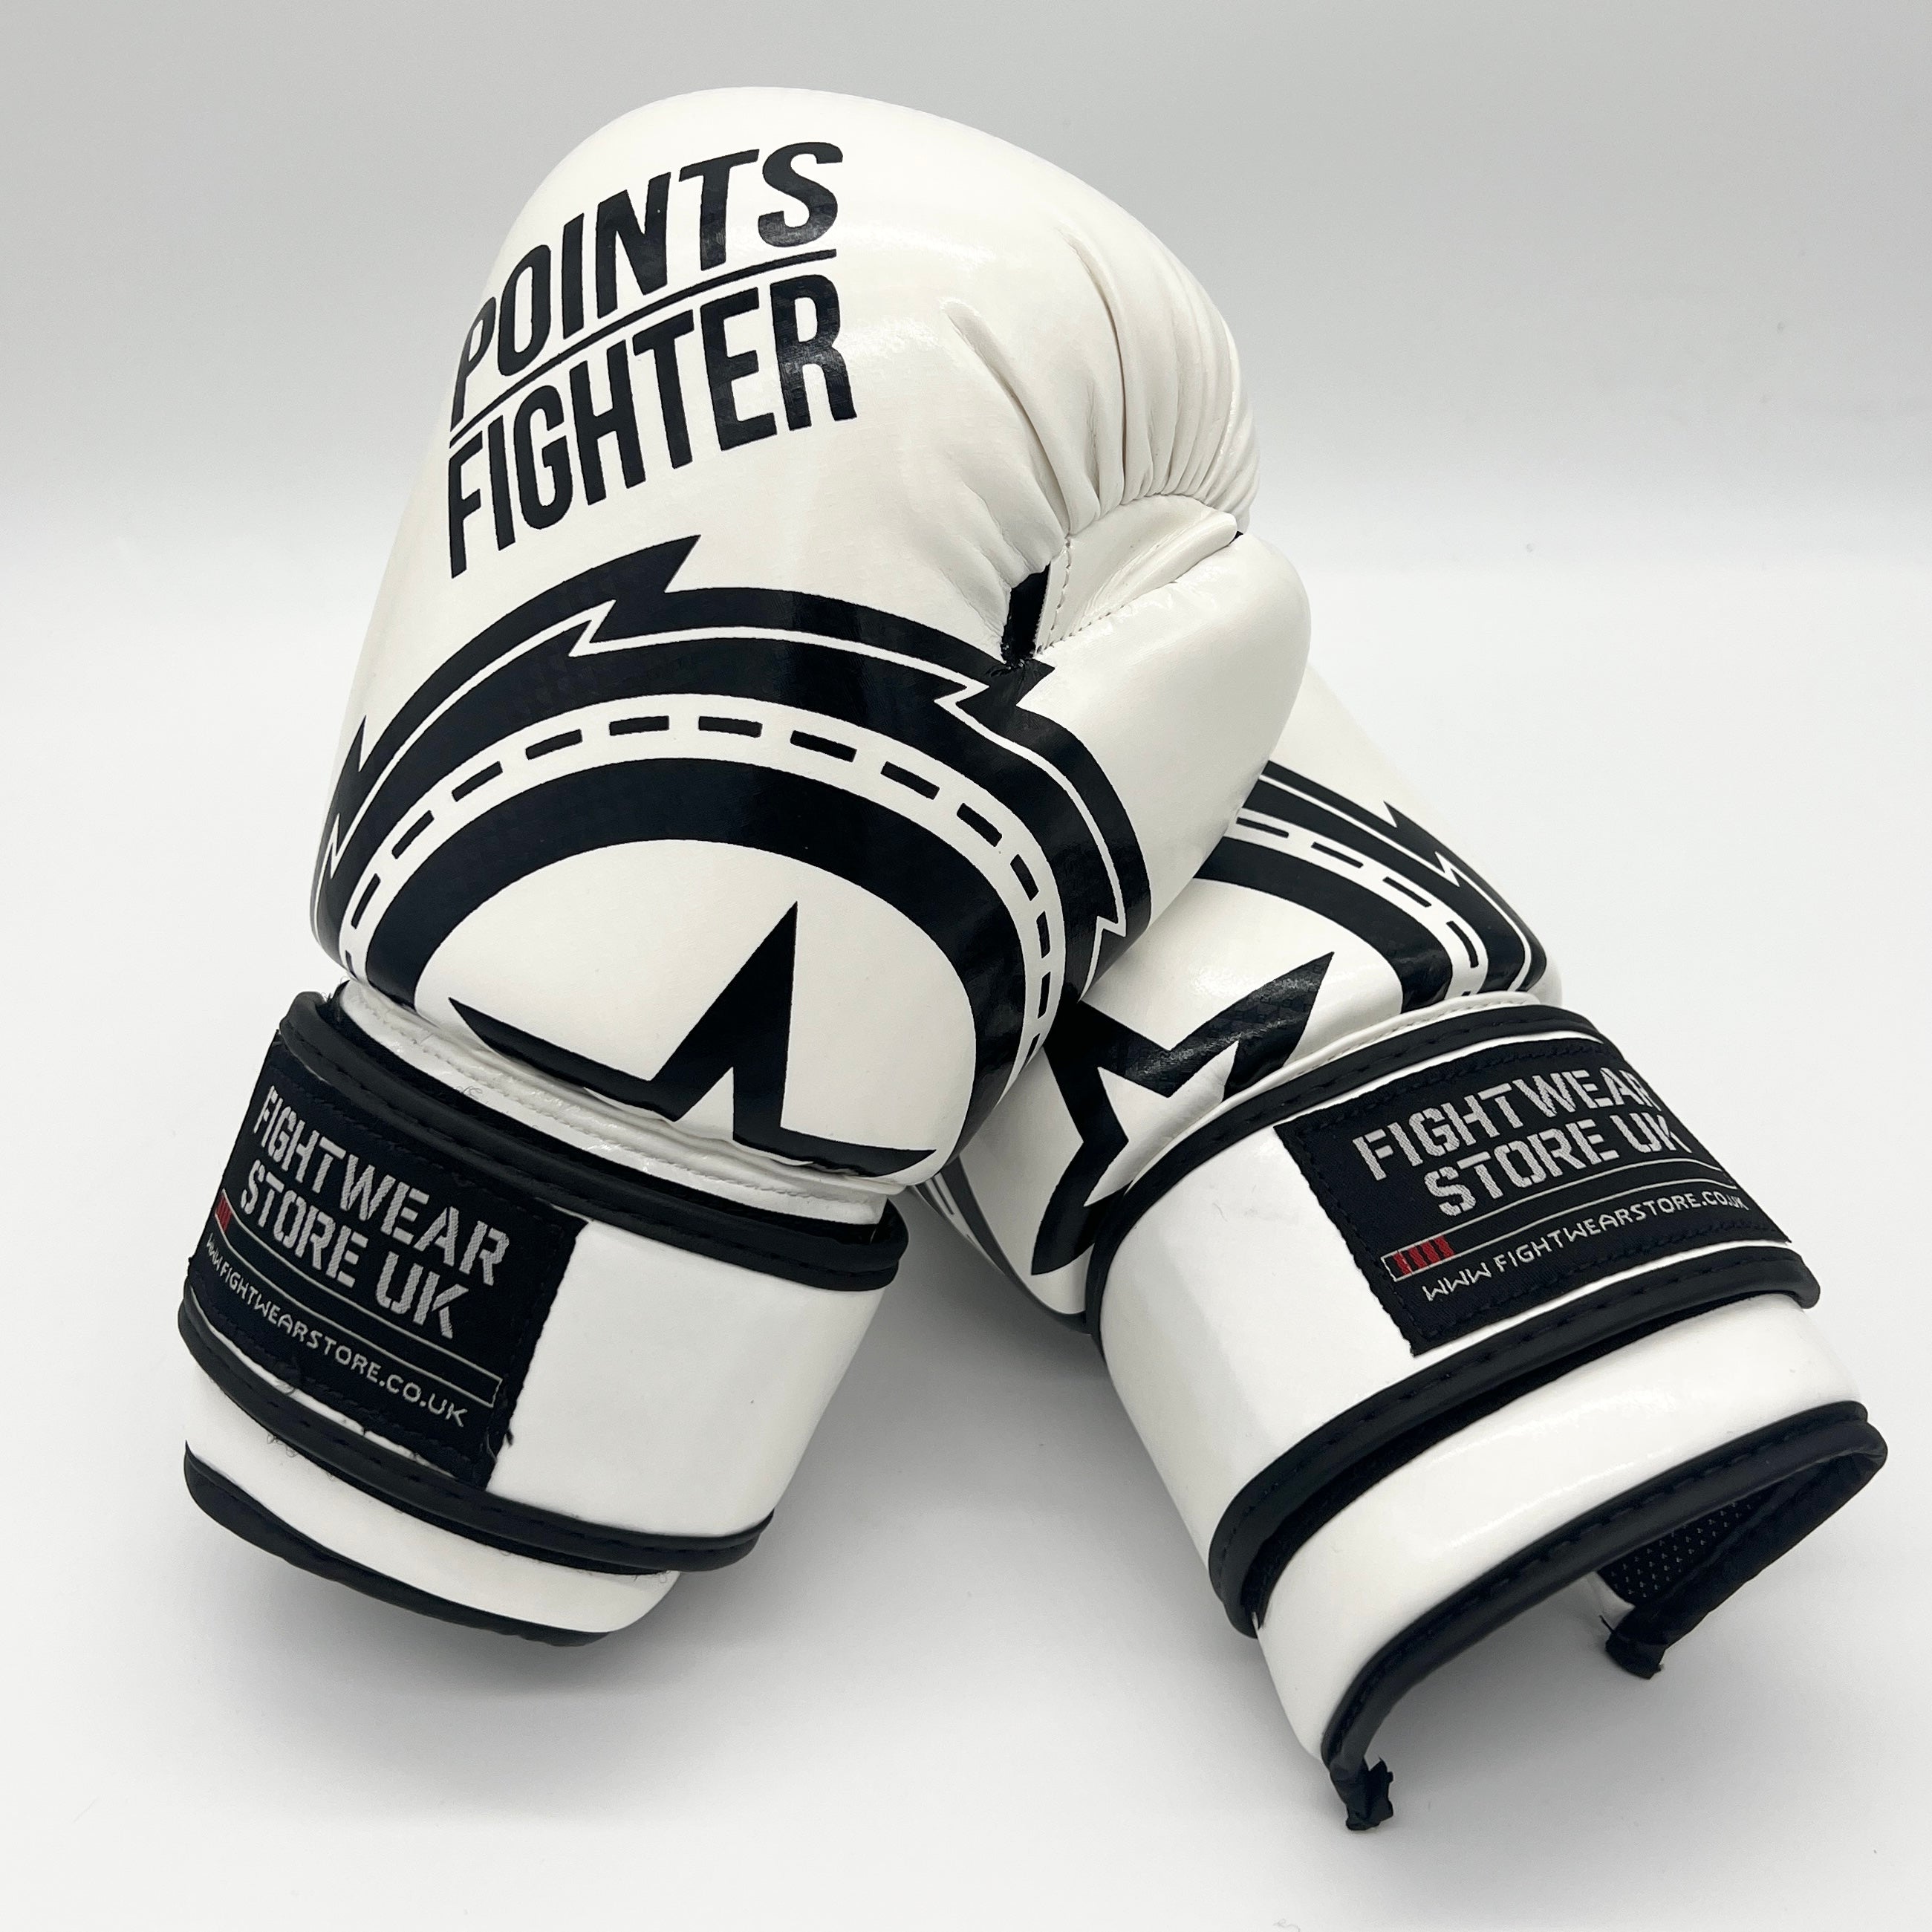 POINTS FIGHTER PRO-2 Open Hand Semi Contact Gloves